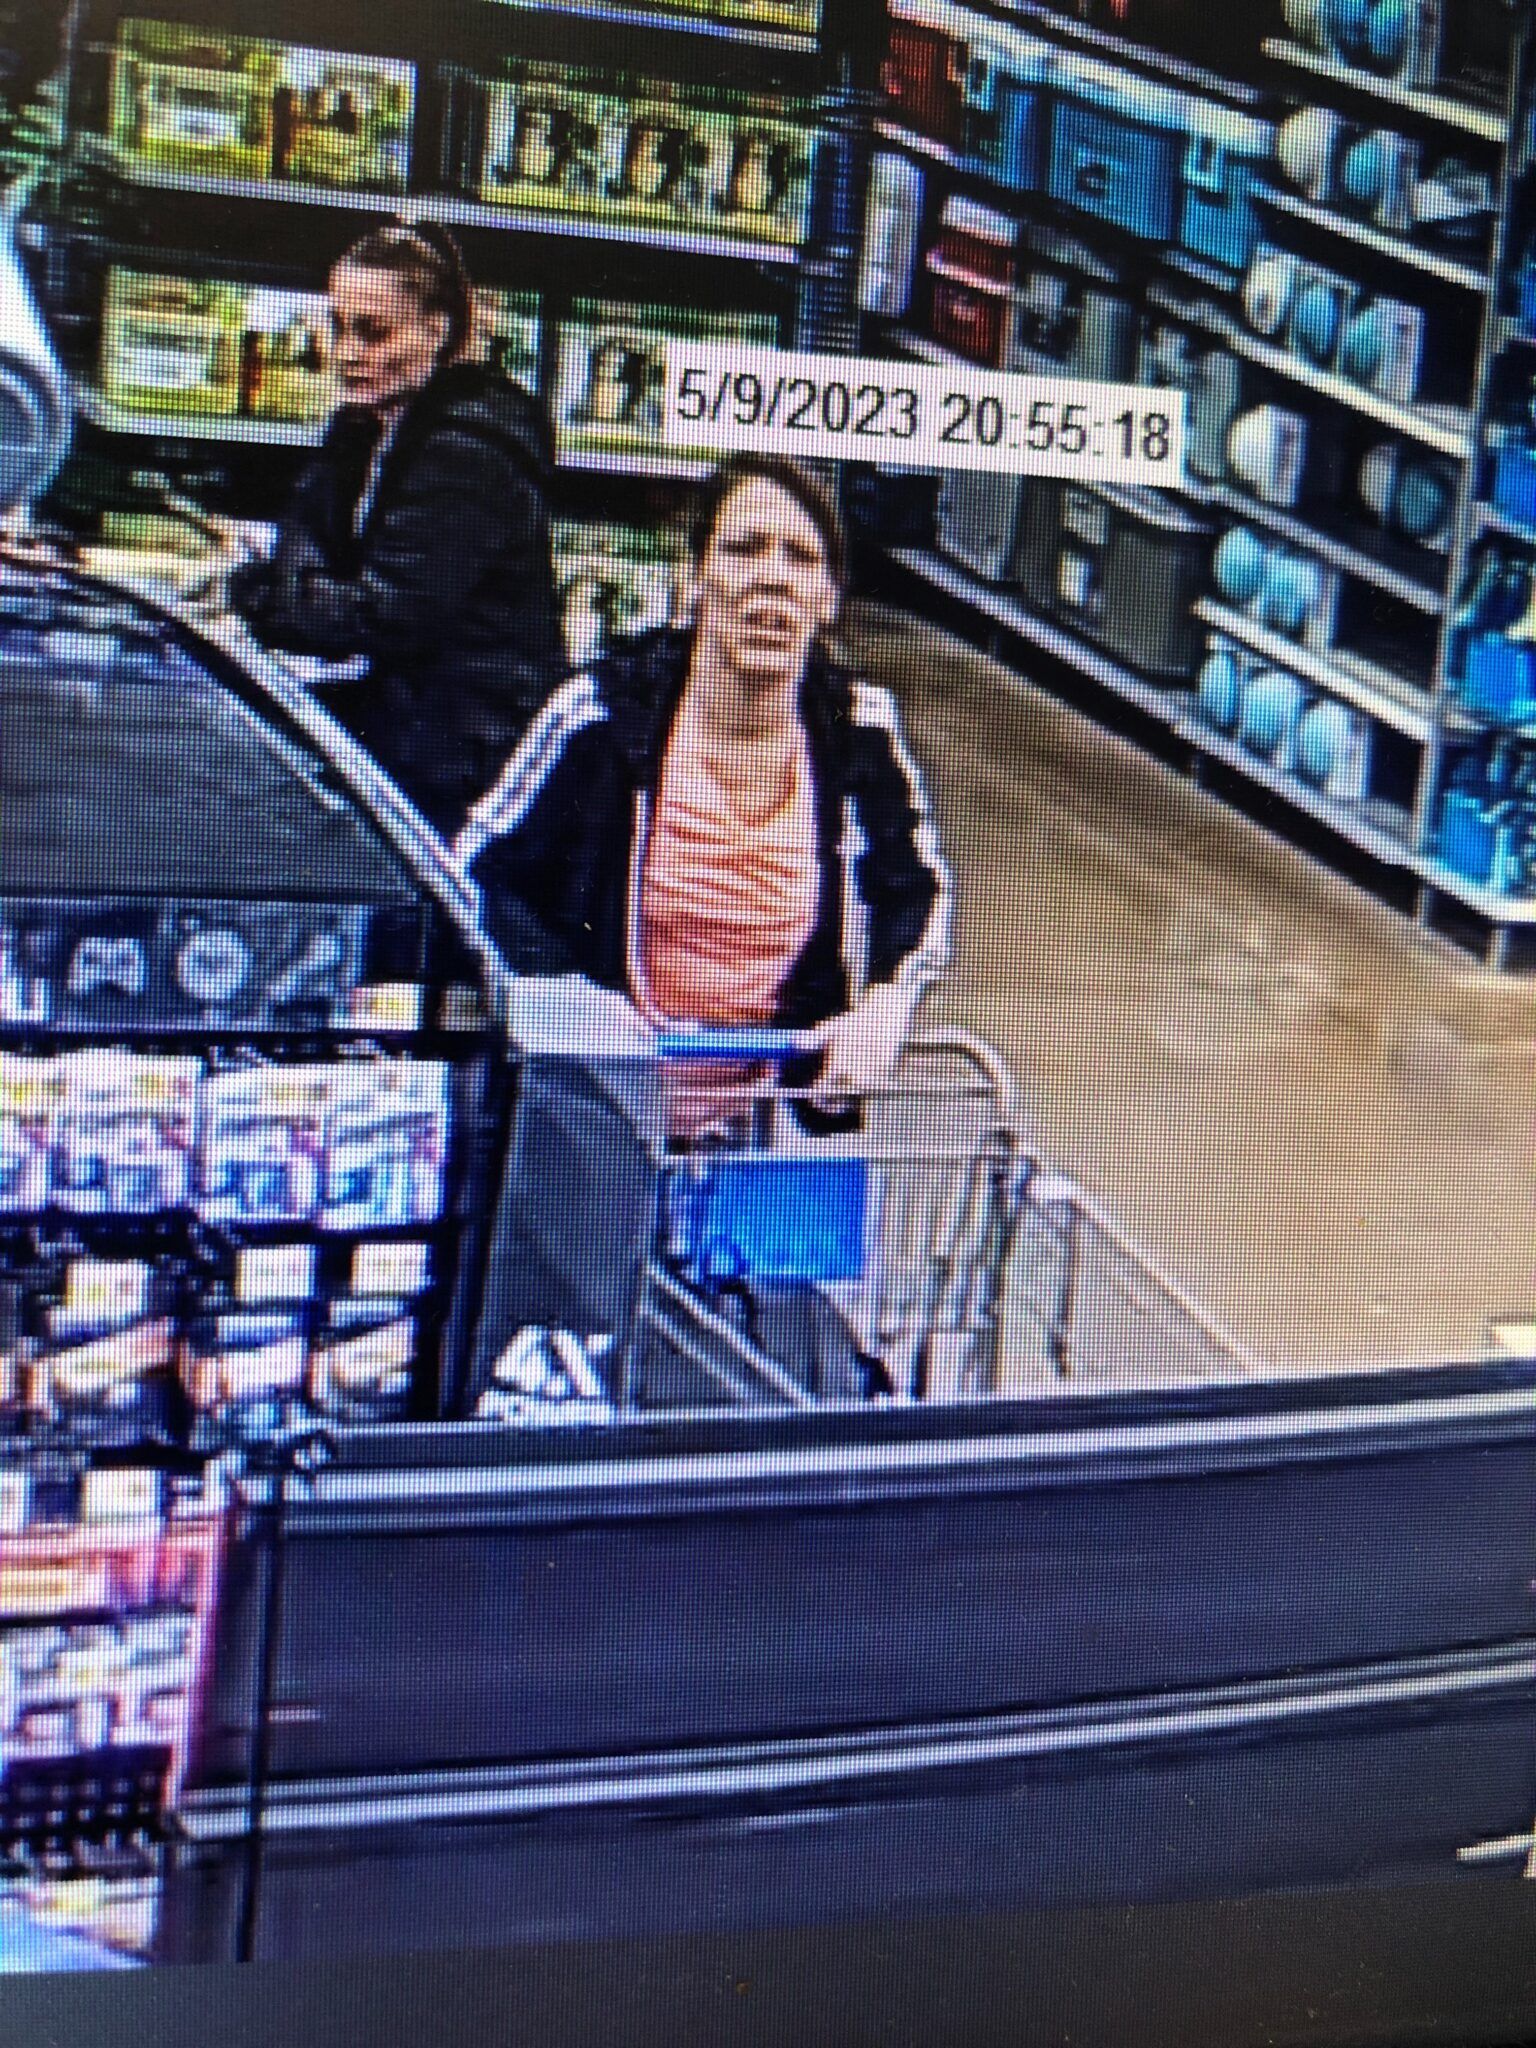 Retail Theft PA23603667 / Closed Crime Stoppers of Fayette County